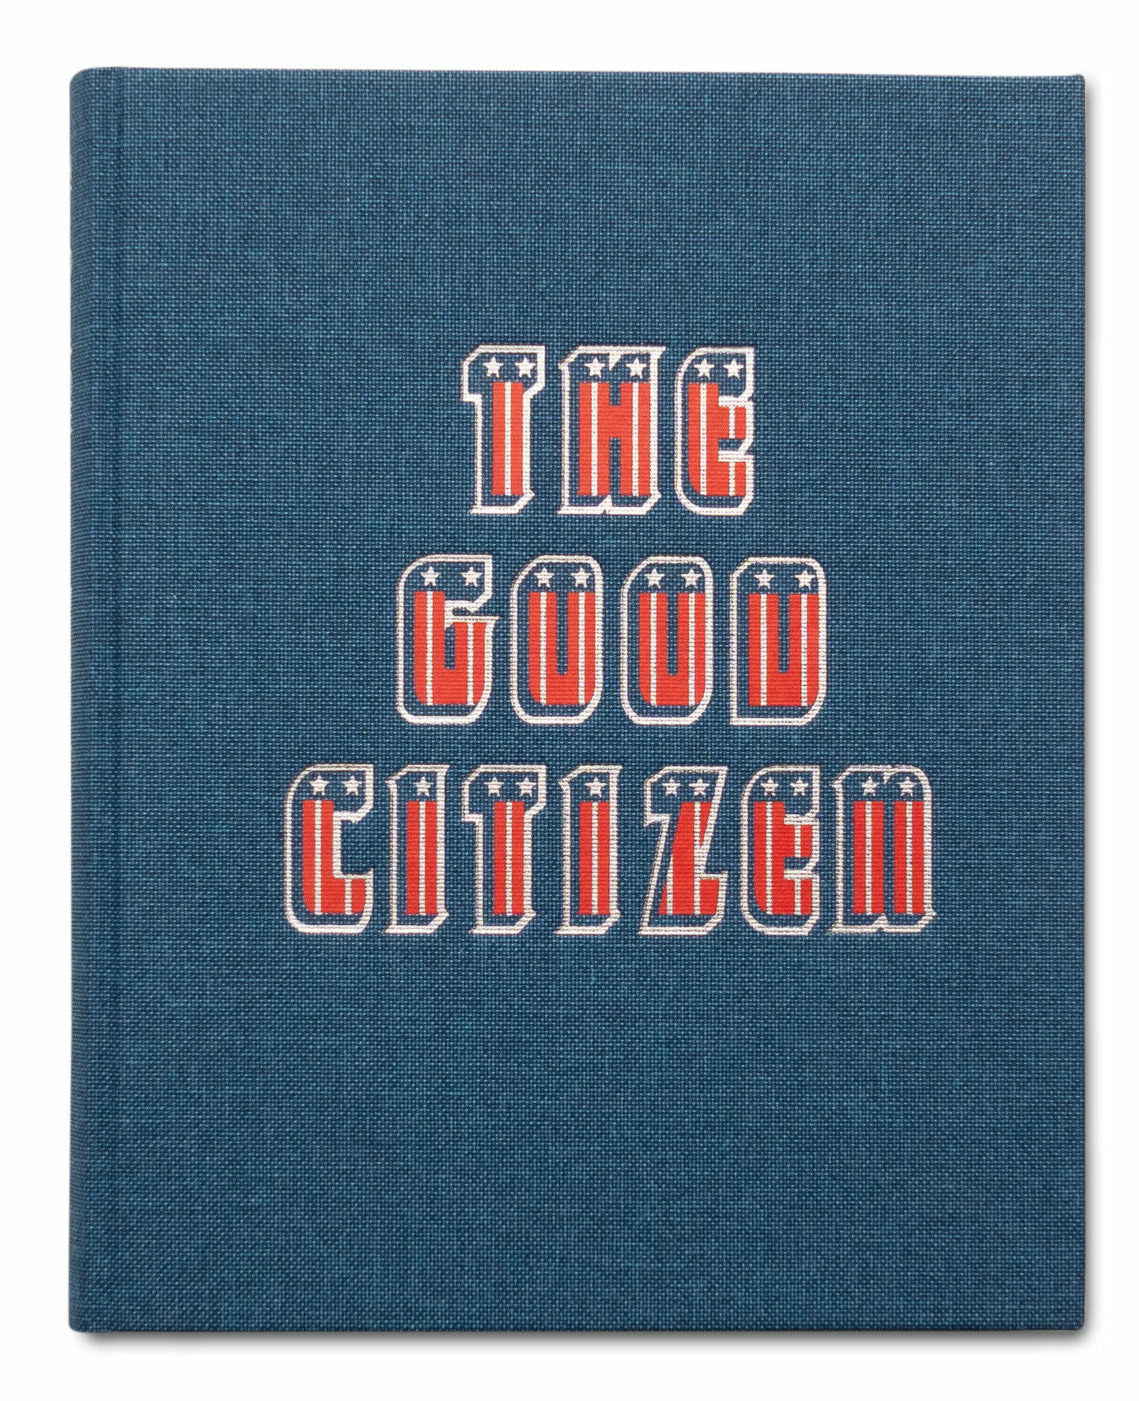 The Good Citizen - Signed